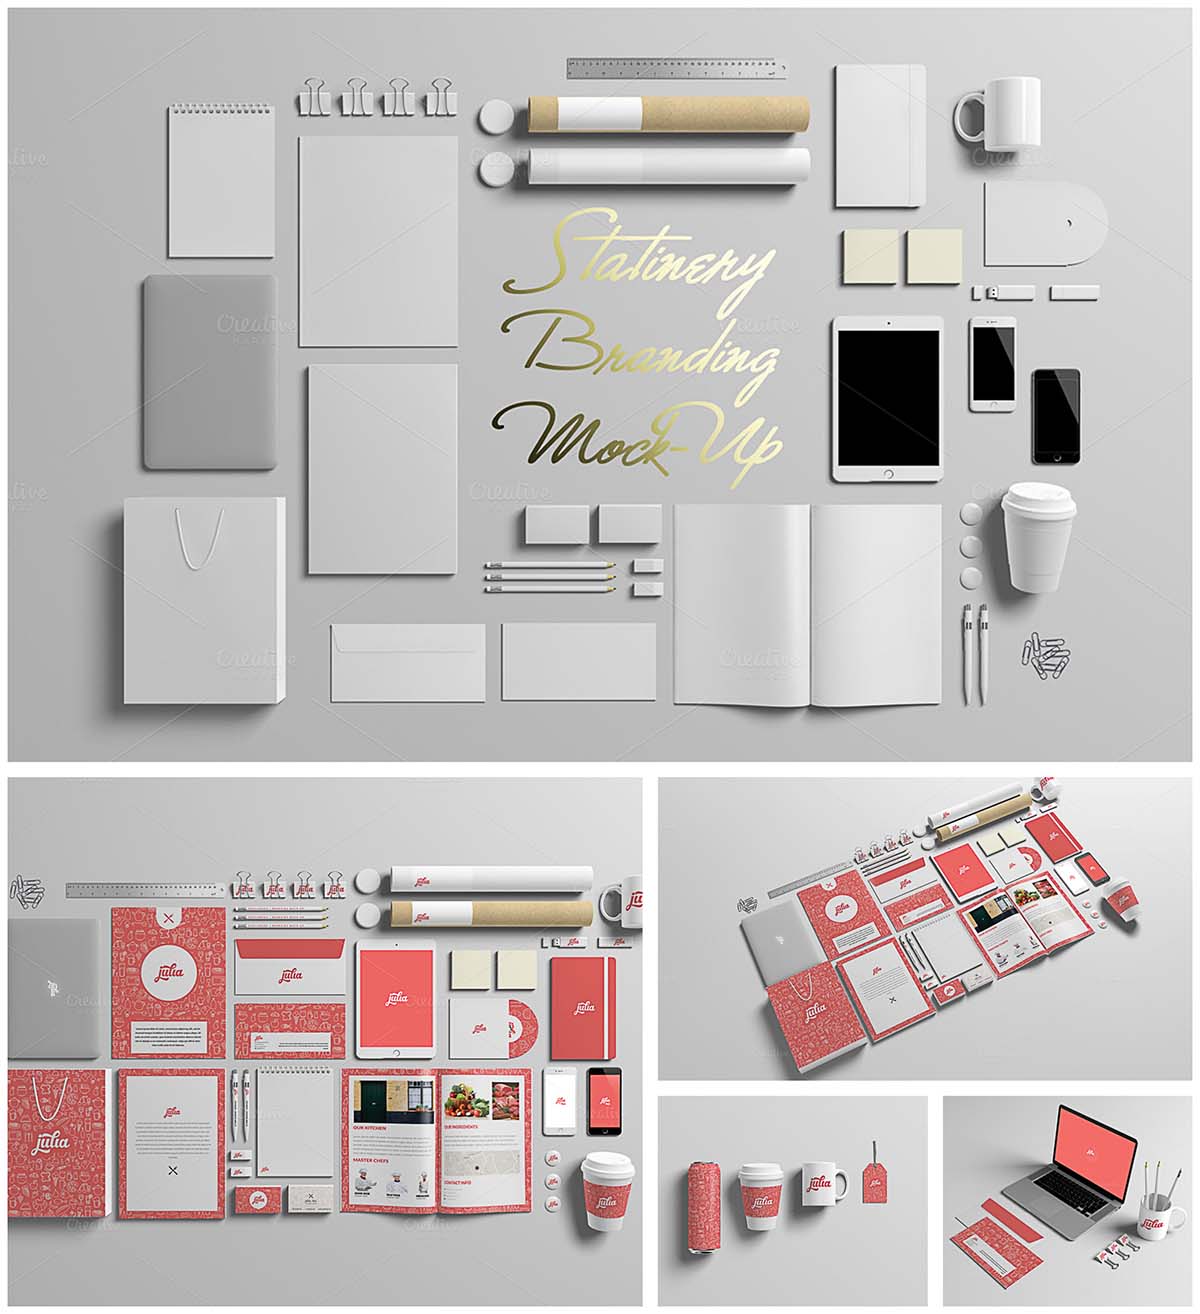 Download Stationery Branding Mockup Free Download Yellowimages Mockups